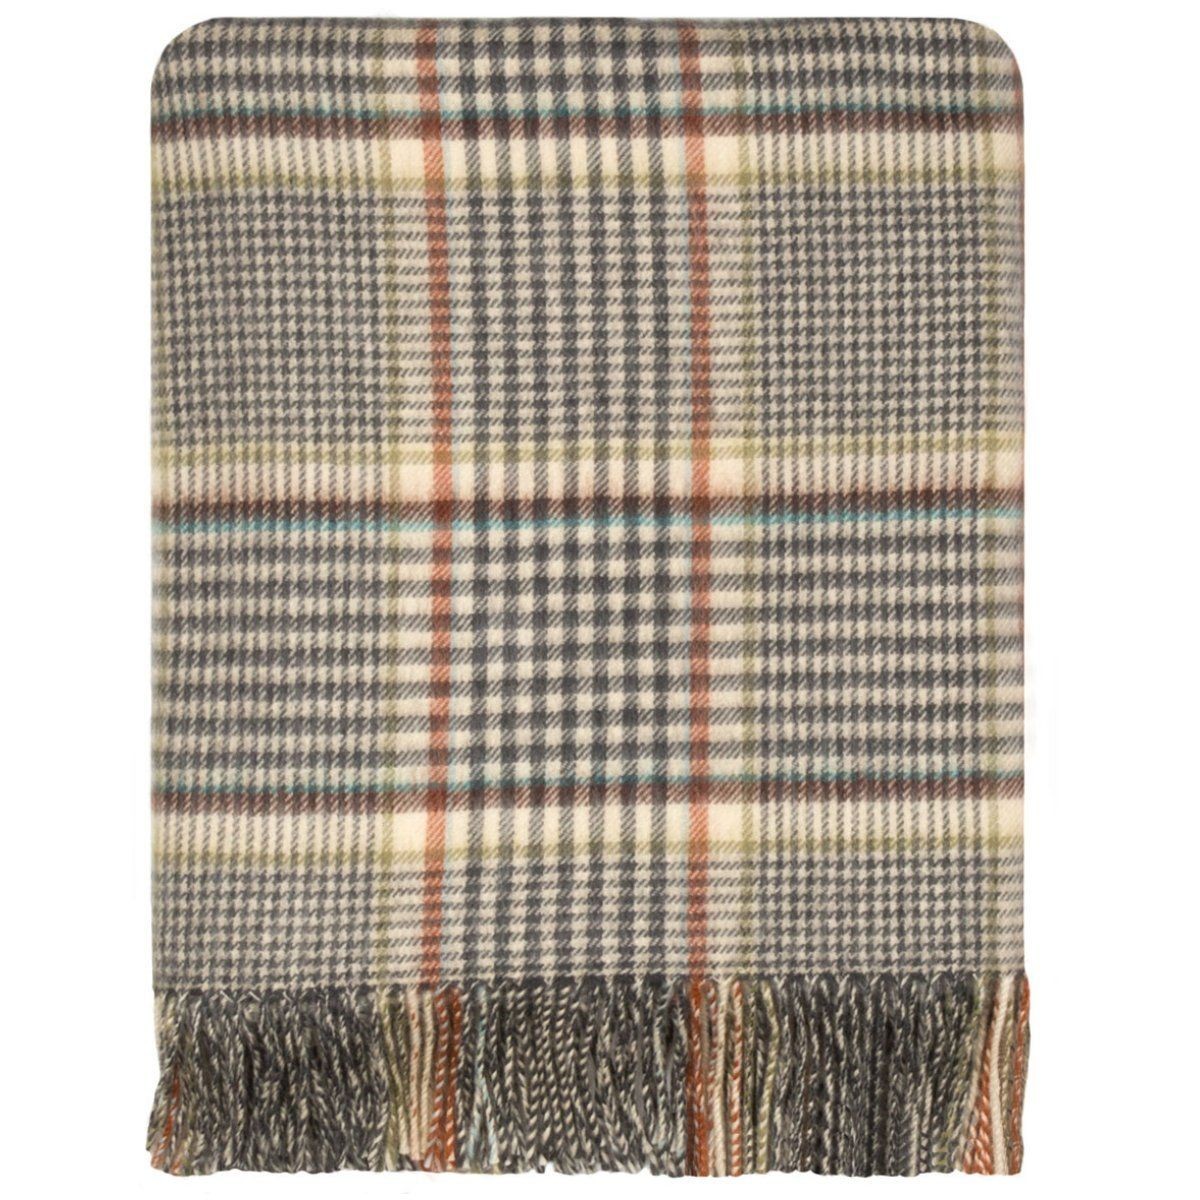 100% Lambswool Blanket in Clyde by Lochcarron of Scotland